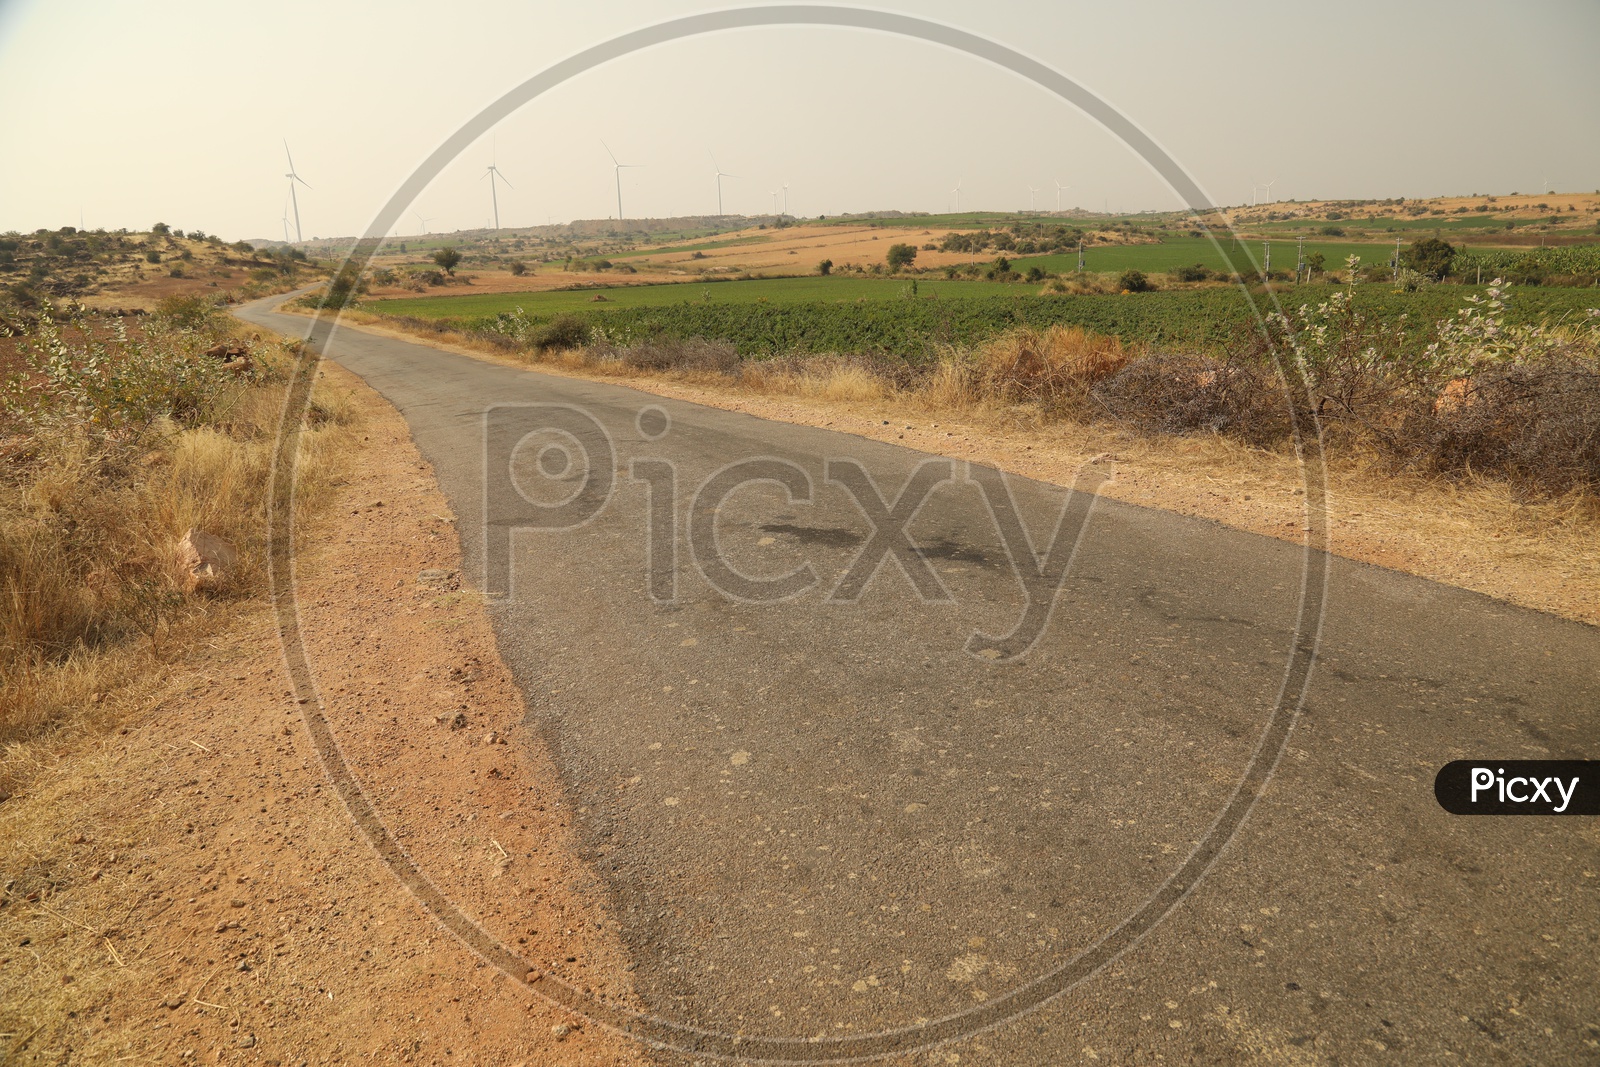 Single lane roadway with agriculture fields along the side